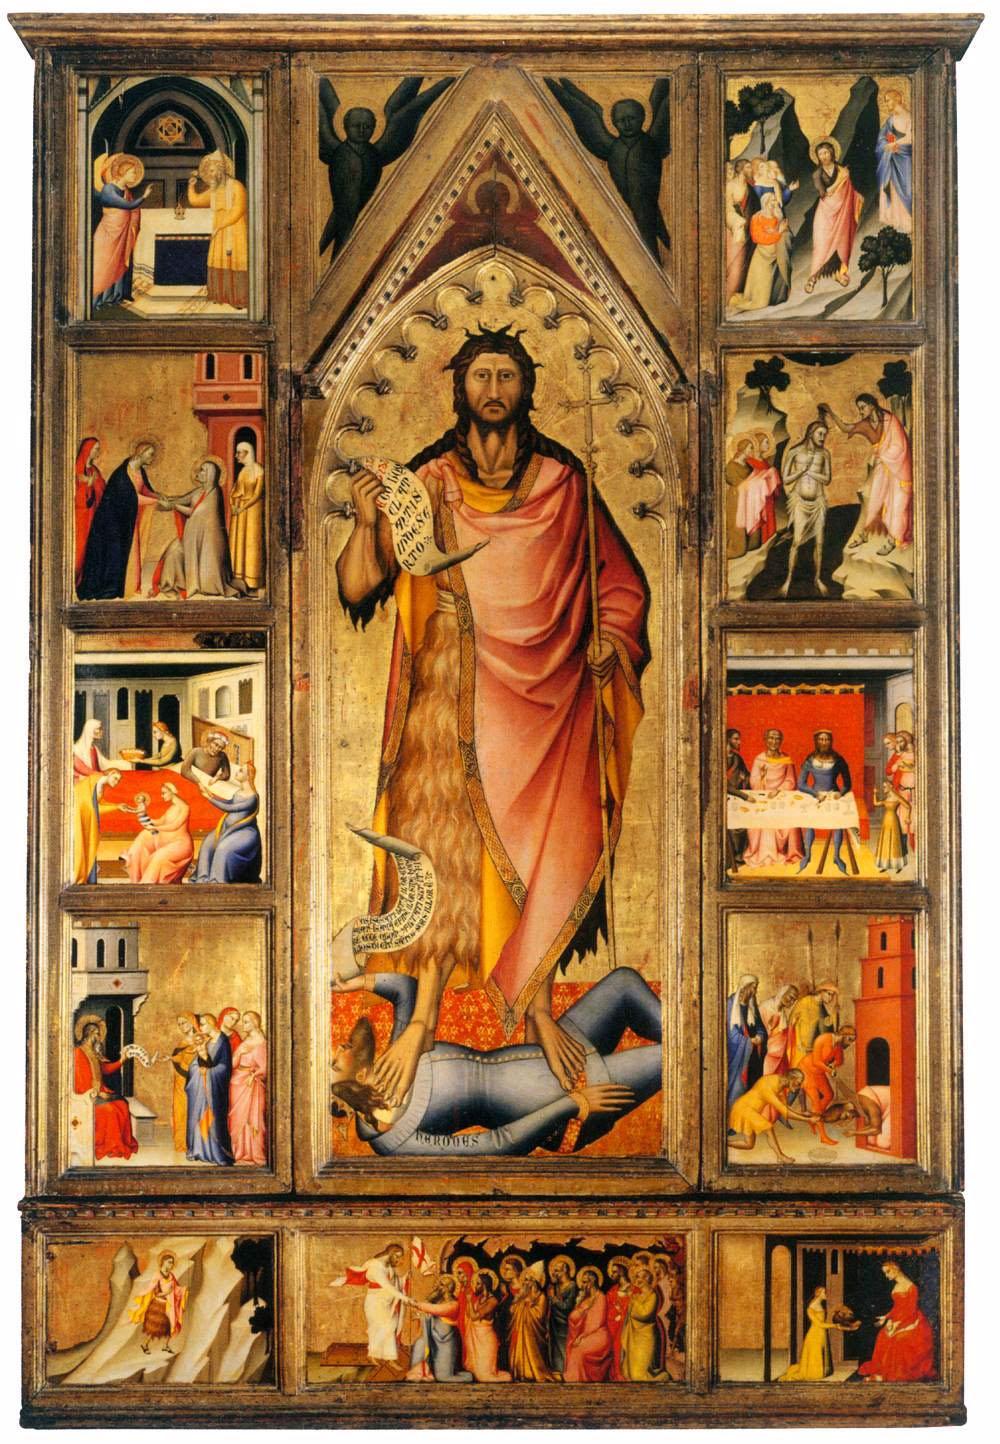 Giovanni del Biondo, Altarpiece of the Baptist, 1365-70 PRAYER & WORSHIP Mass of Anticipation: Saturday, 5:15 p.m. Sunday Mass: 7:30, 9:00 and 10:30 a.m. (English); 5:00 p.m. (Spanish) Daily Mass: Monday, Tuesday, Wednesday and Friday, 7:00 a.